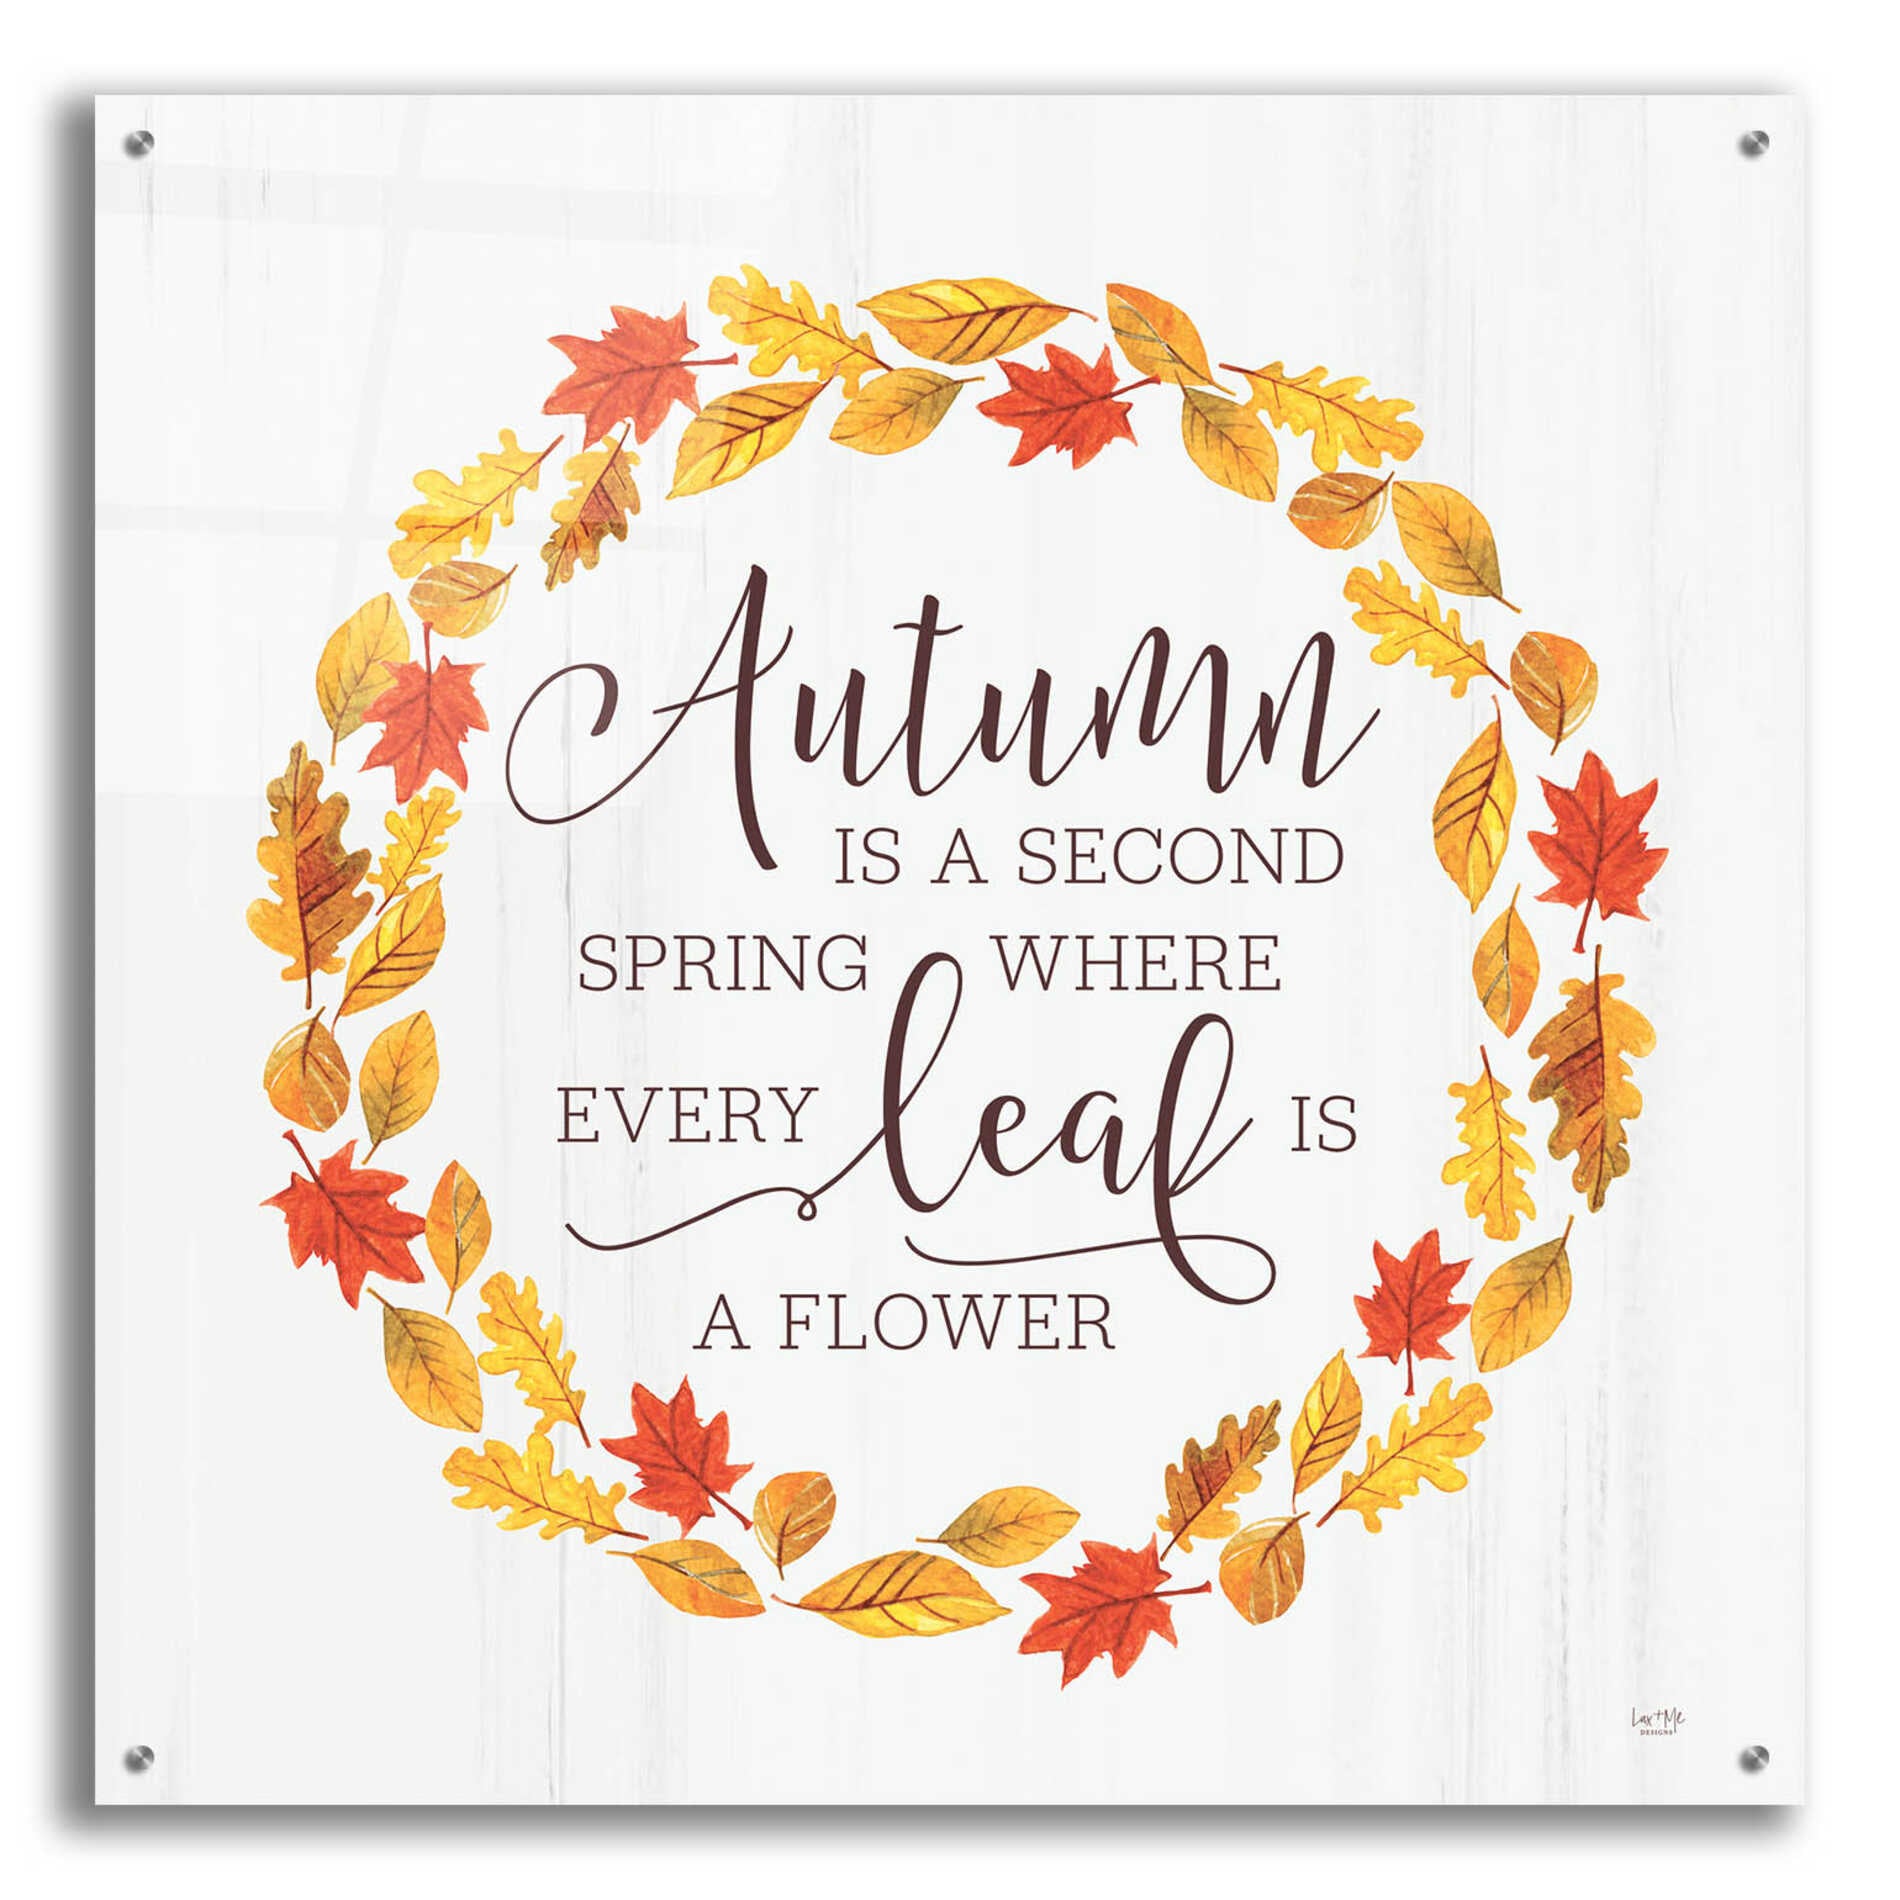 Epic Art 'Autumn is a Second Spring' by Lux + Me Designs, Acrylic Glass Wall Art,36x36